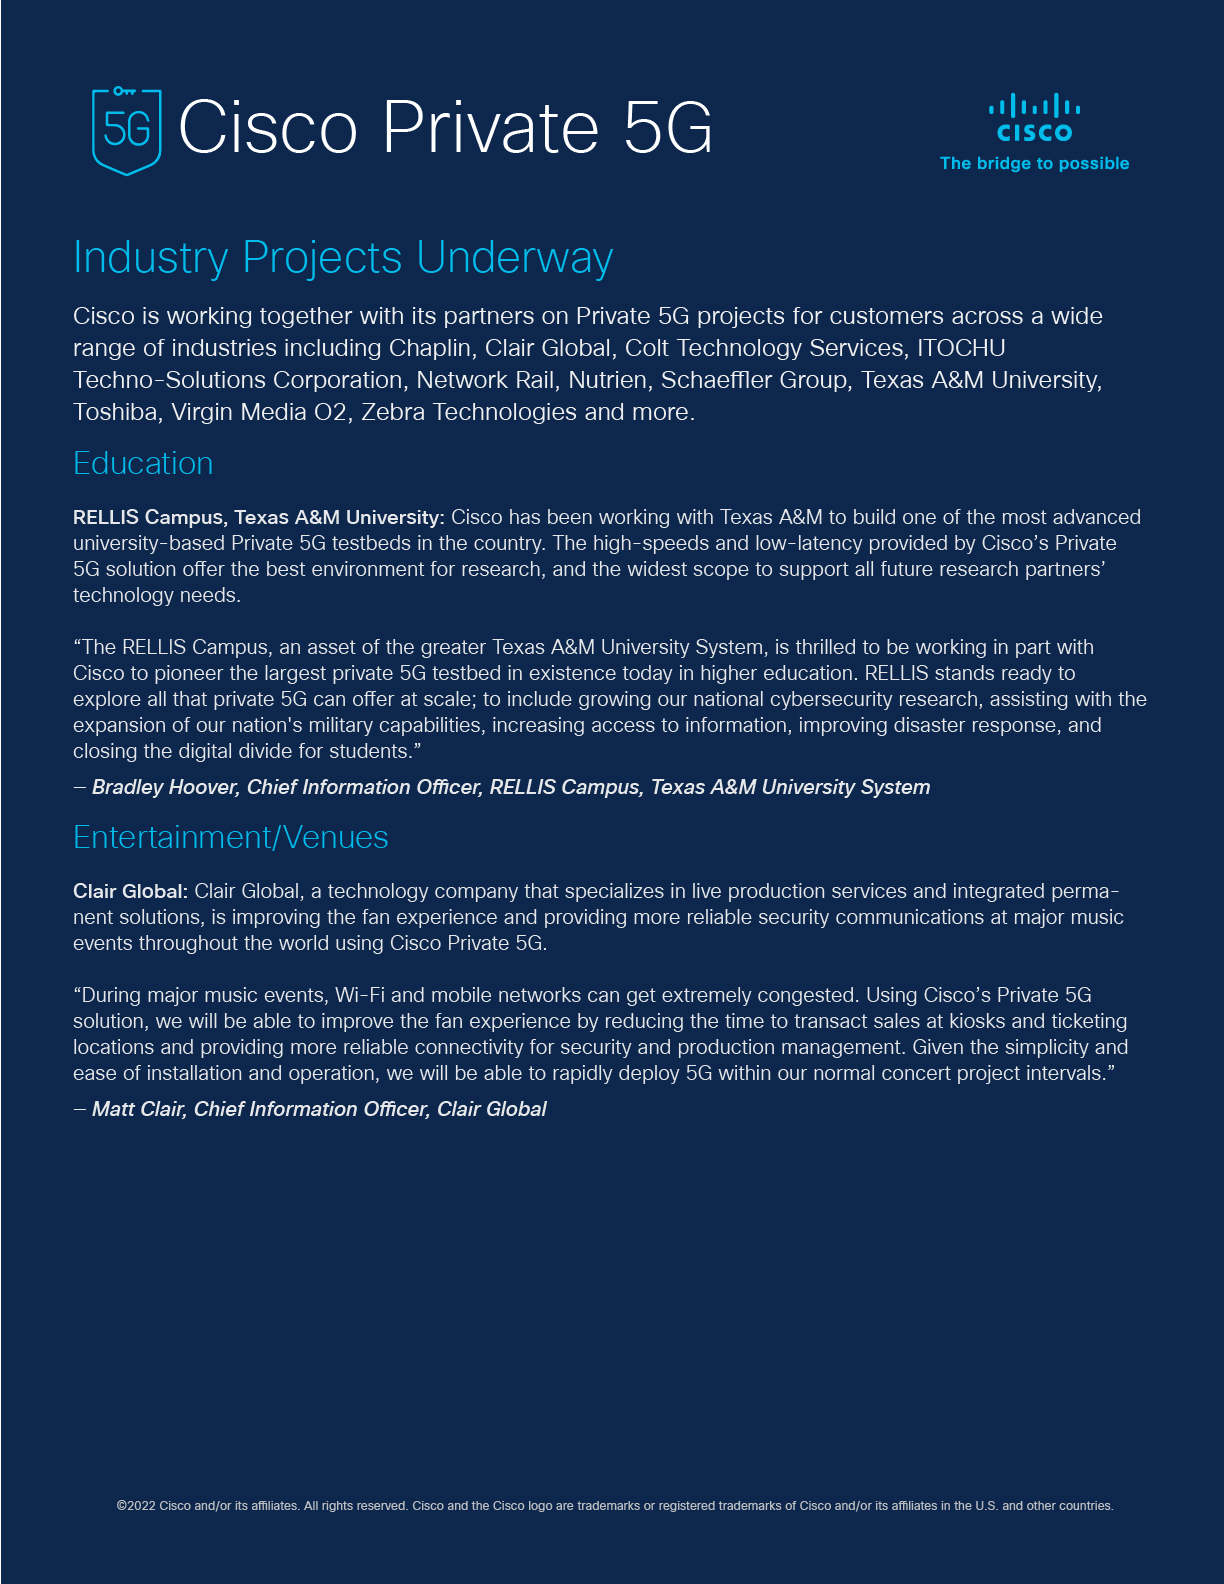 Industry Projects Underway